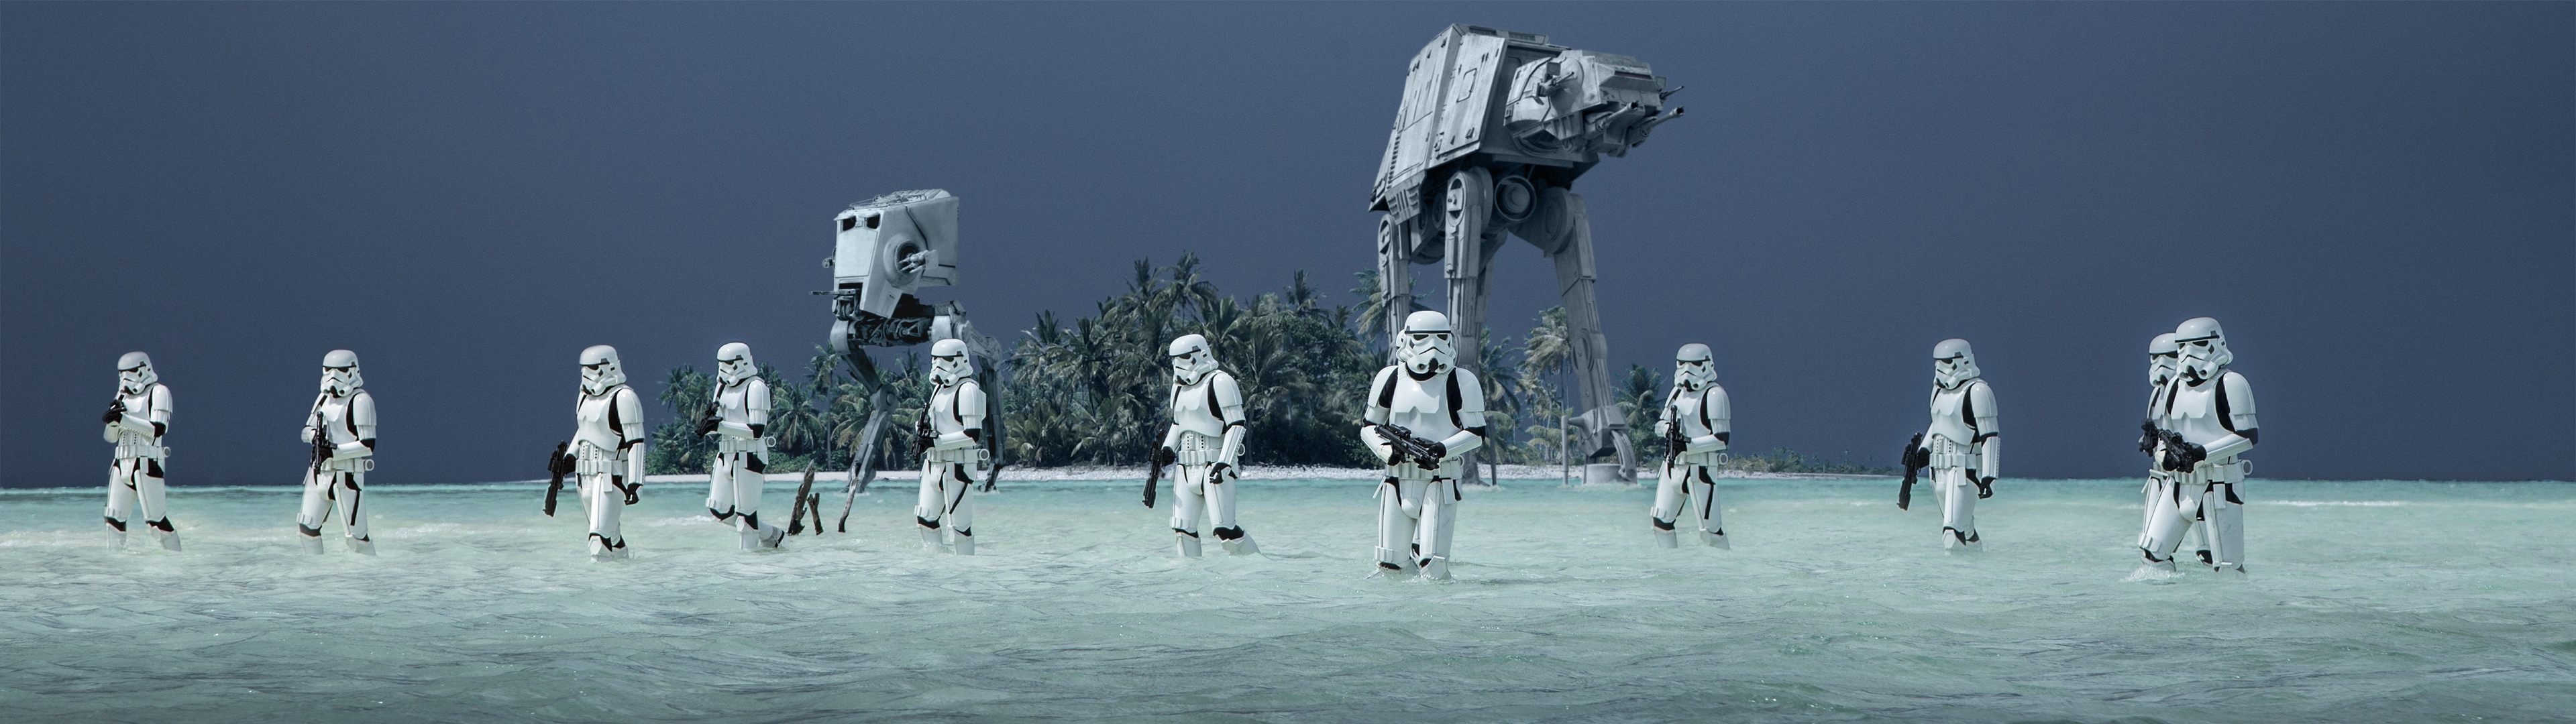 General 3840x1080 Star Wars Rogue One: A Star Wars Story stormtrooper AT-ST Walker AT-ST AT-AT beach water trees palm trees dual monitors Imperial Forces movies